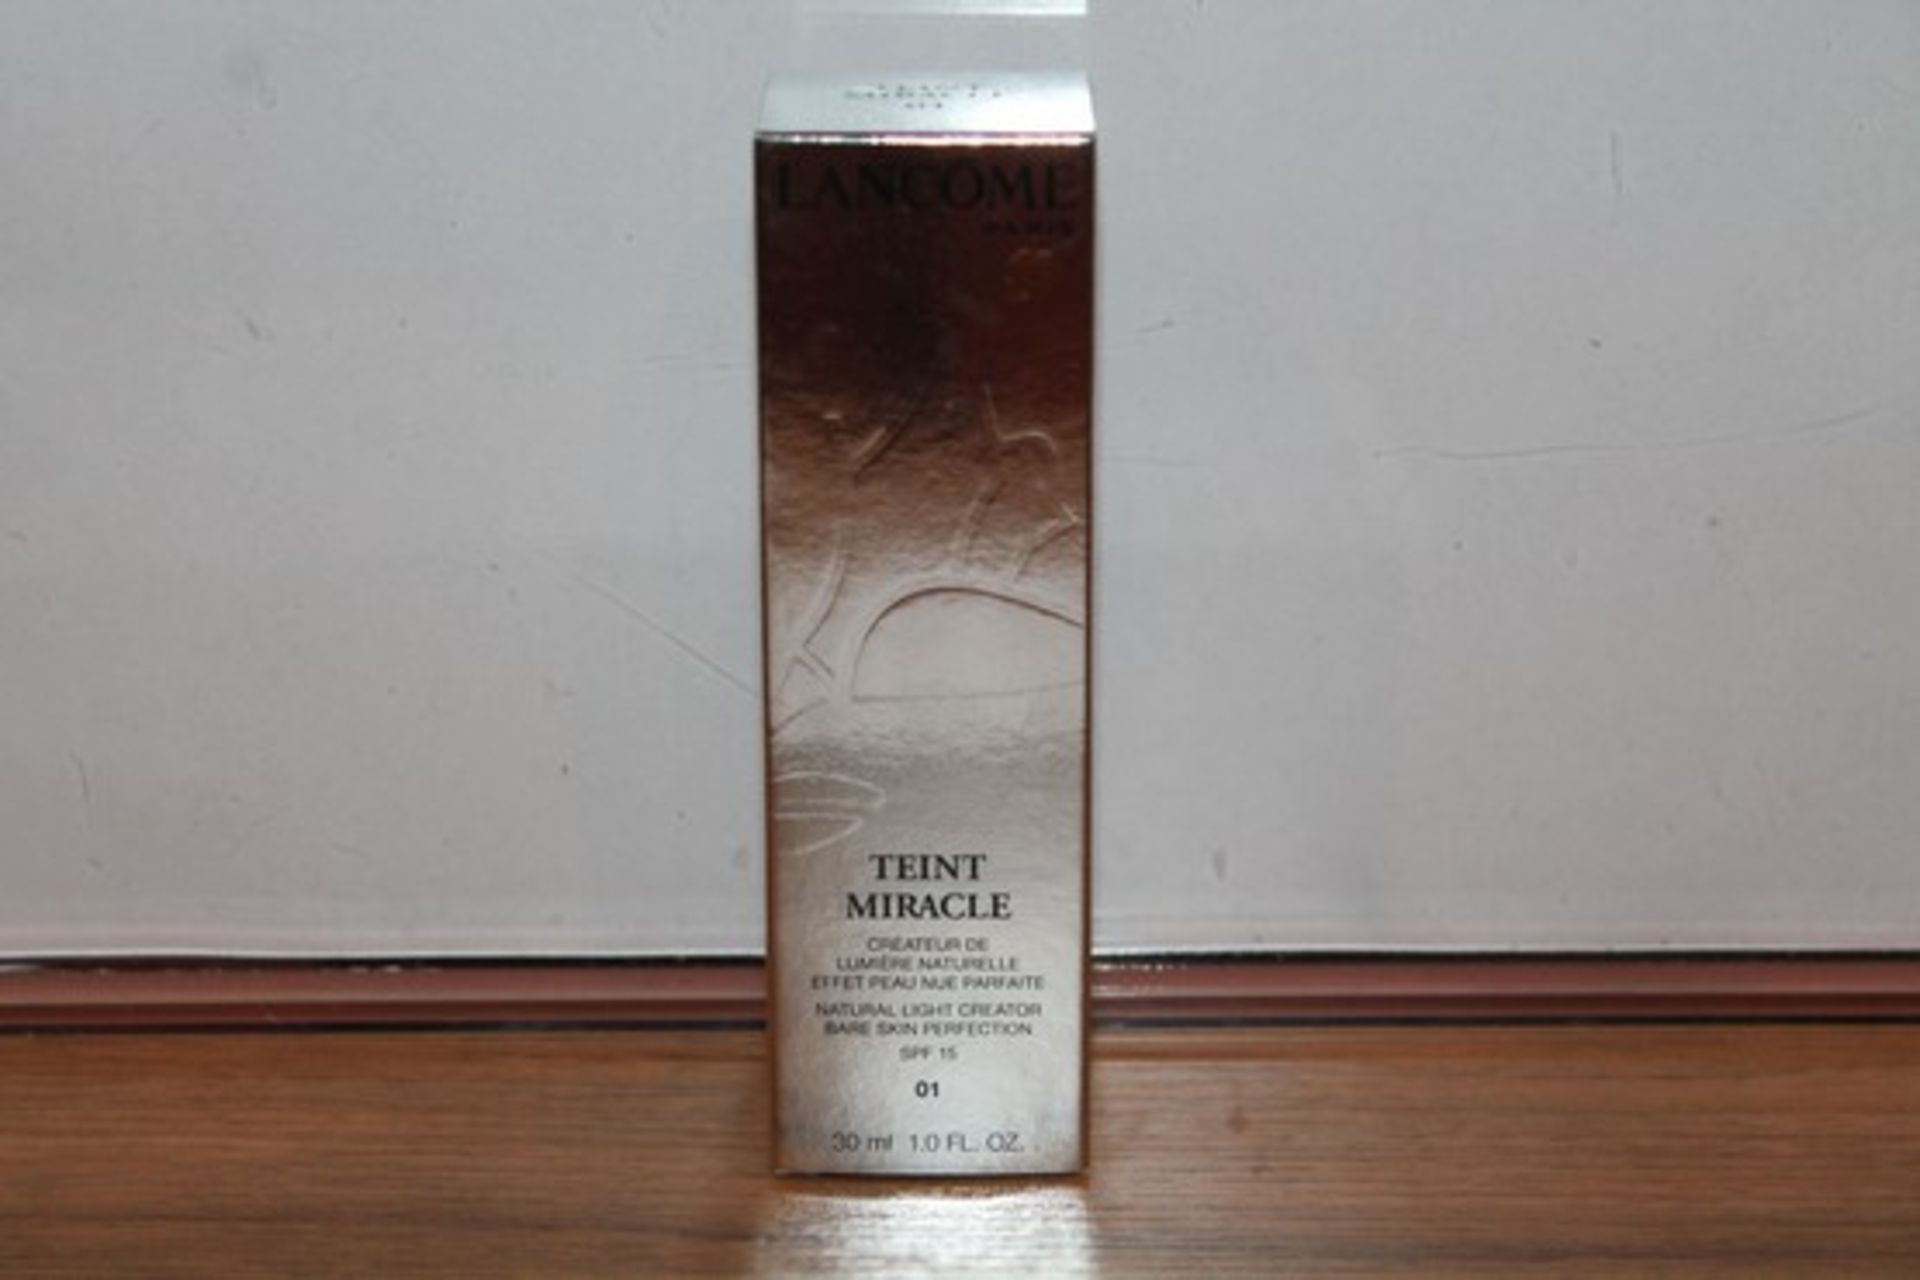 BOXED BRAND NEW FACTORY SEALED LANCOME PARIS TEINT MIRACLE SPF 15 01, 30ML (DS RES FASHION) (TRAILER